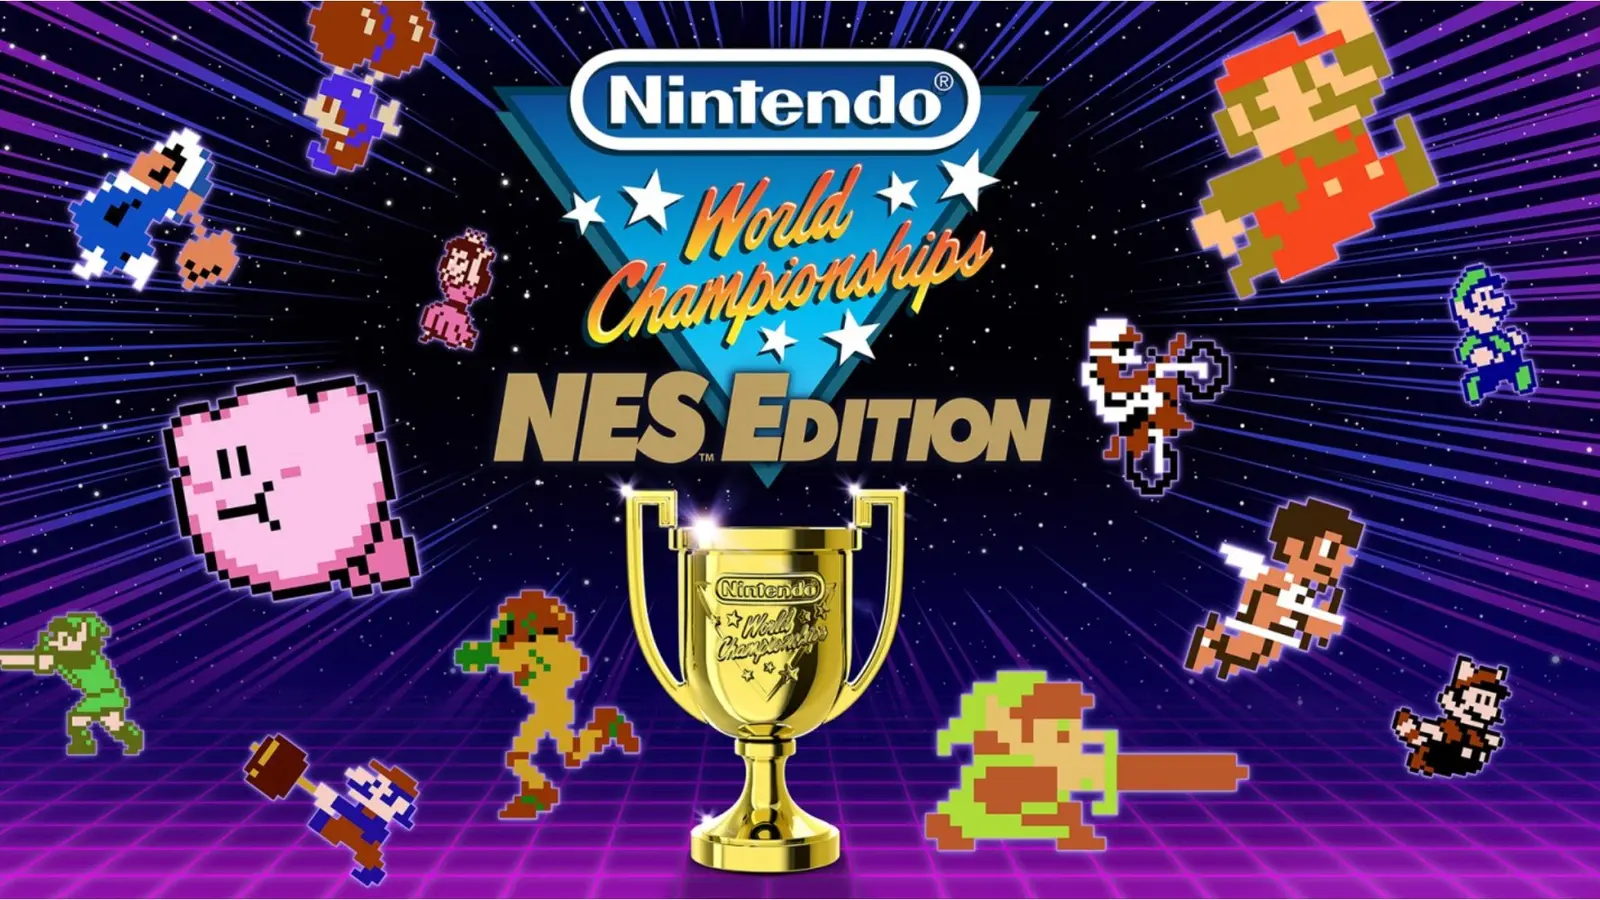 a poster for the nintendo world championships nes edition .